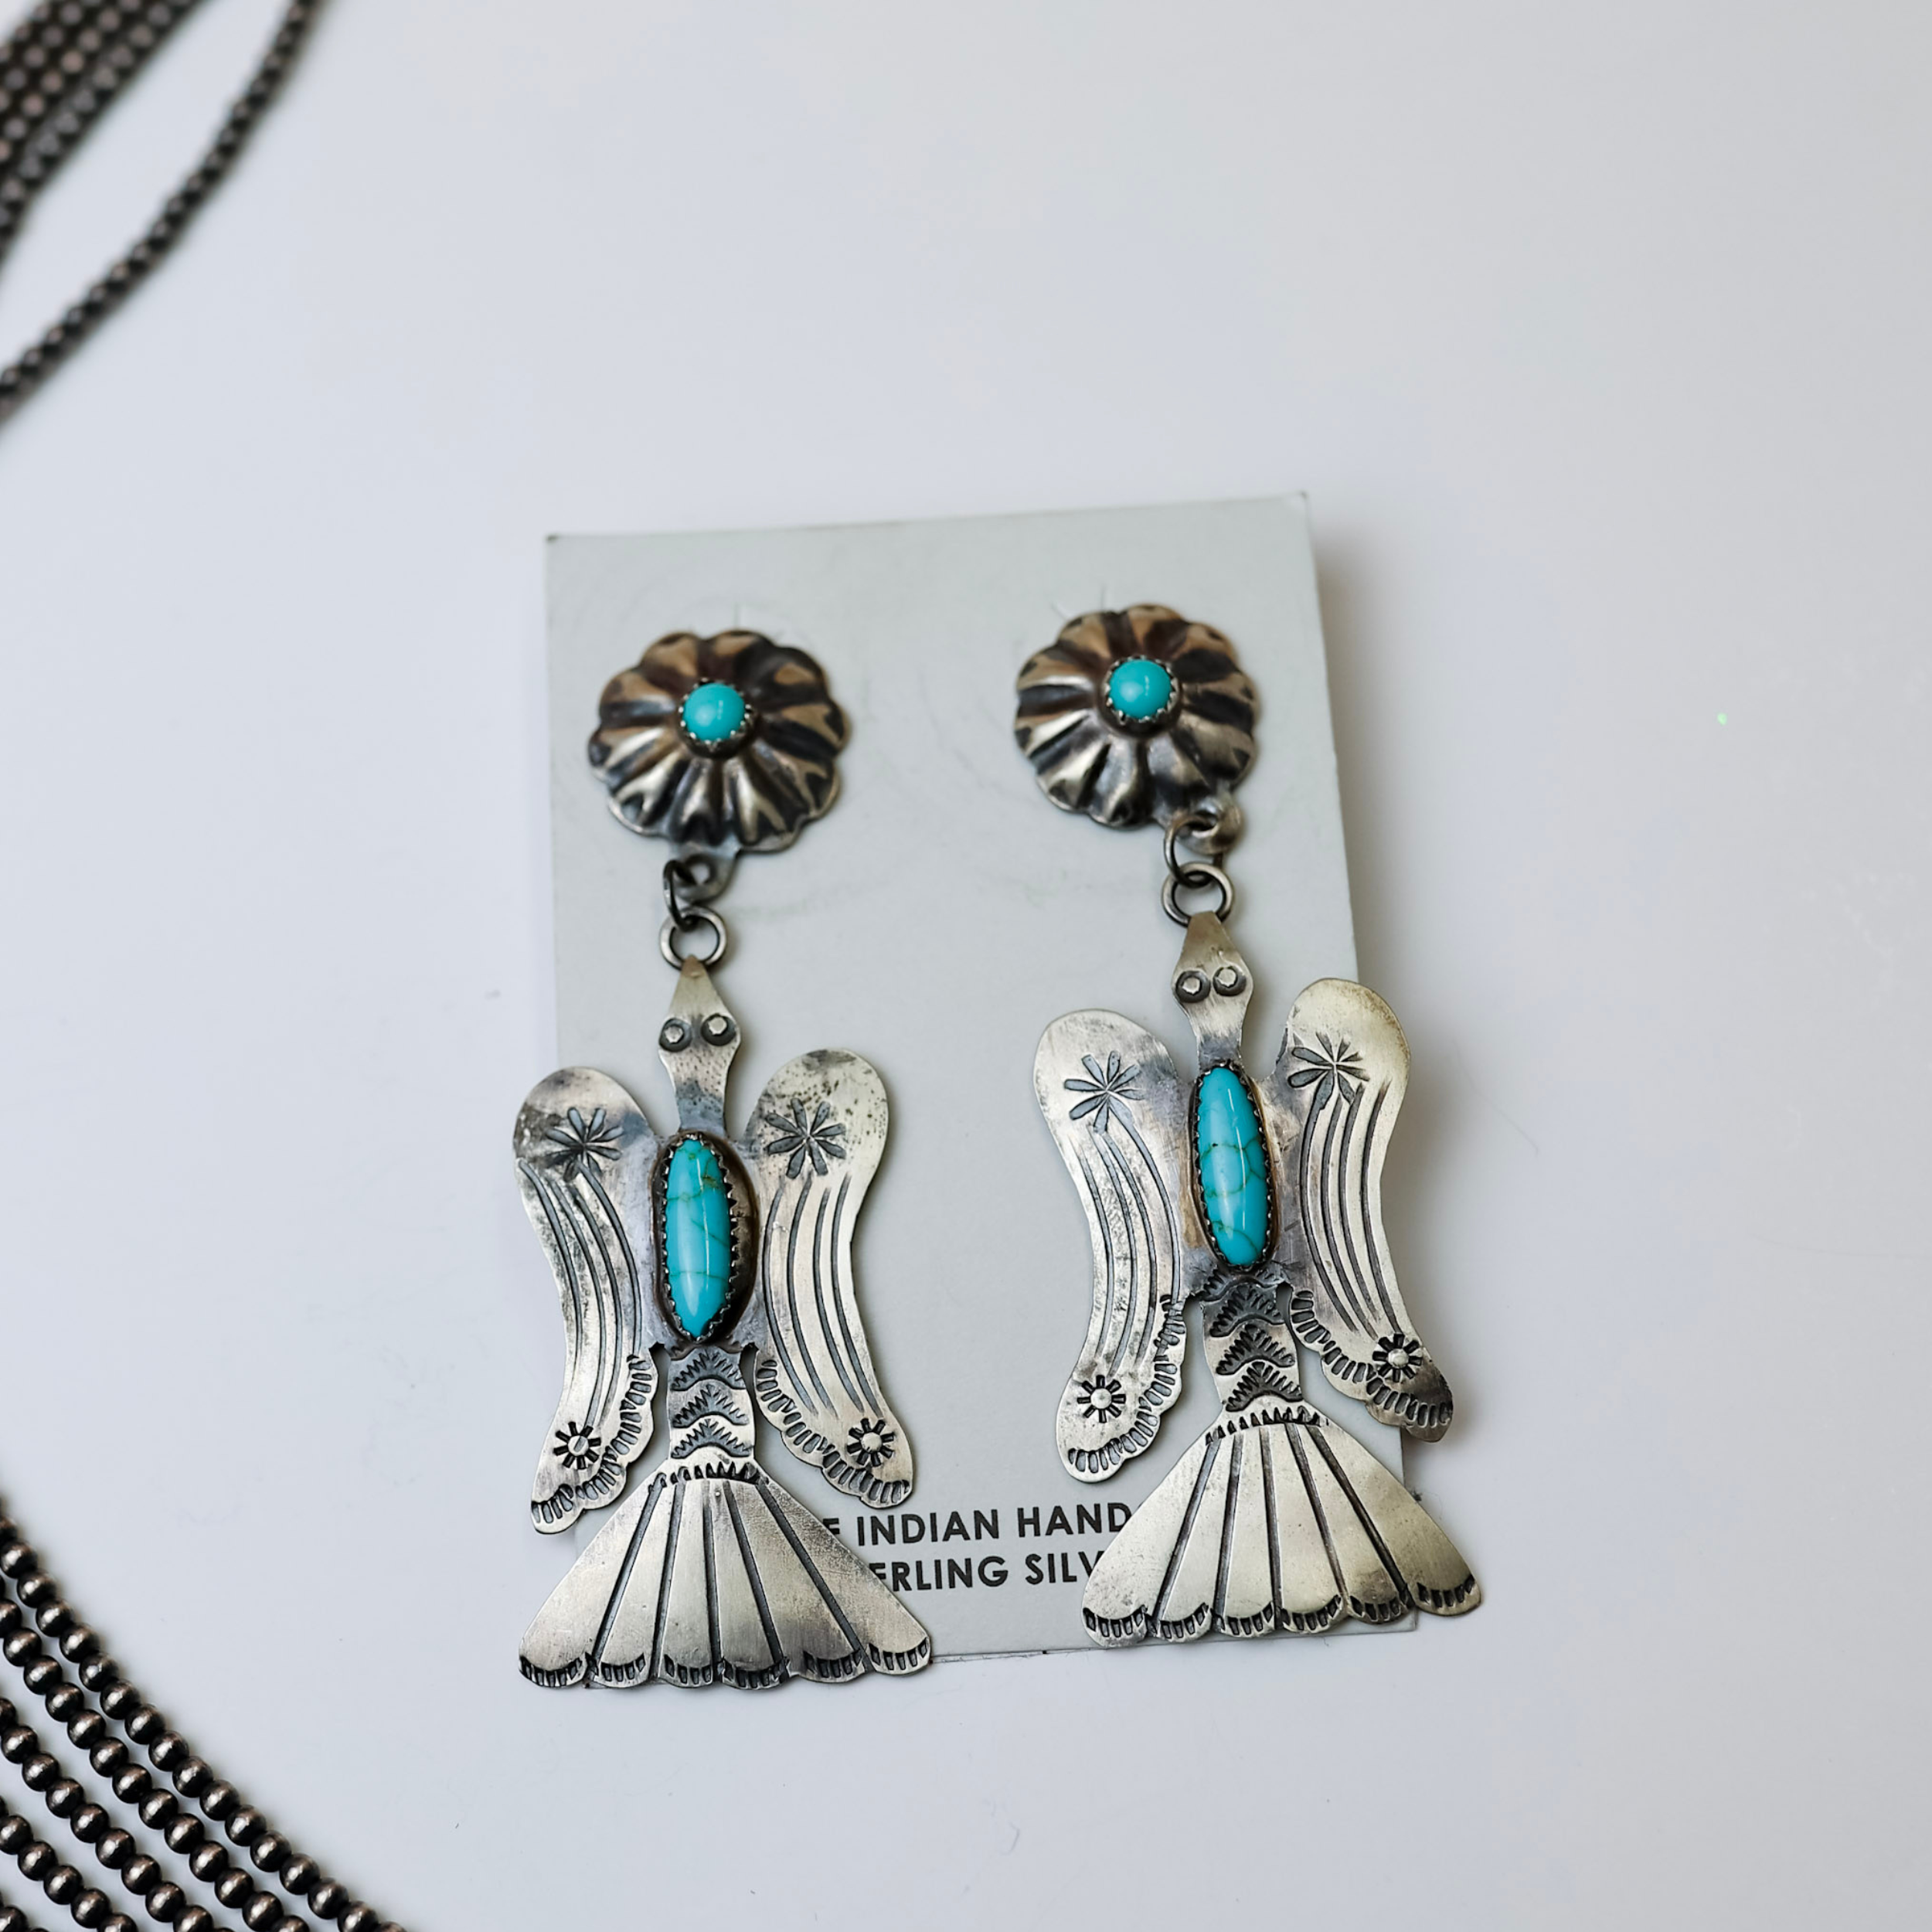 Tim Yazzie Navajo Handmade Sterling Silver with Turquoise Stones Thunderbird Dangle Earrings are centered in the middle of the picture. Navajo pearls are laid on the left side of the picture. All is on a white background. 